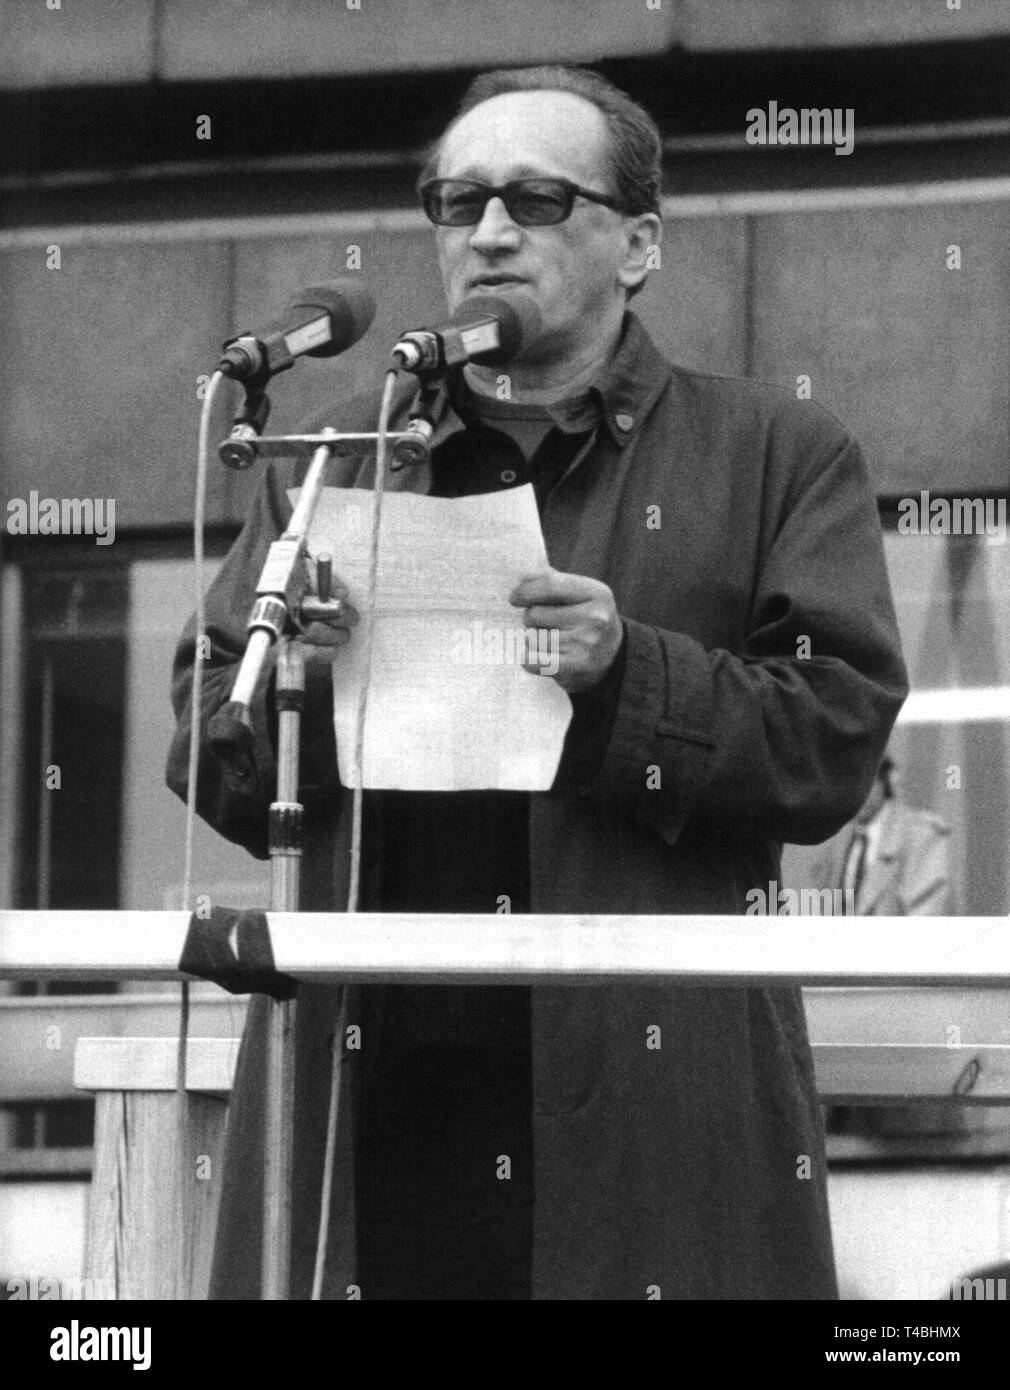 GDR playwright Heiner Mueller speaks in front of the largest demonstration ever held on the territory of the GDR on Alexanderplatz square in former East Berlin, November 4th 1989. More than 500,000 people had gathered to demand more democracy and civil rights. Since the end of October 1989 mainly East Berliner and Leipzig citizens staged regurlar mass demonstrations, calling out for political reforms, freedom of speech and fair elections. The growing pressure from the streets eventually forced the GDR leadership to open the inner German border on November 9th 1989. | usage worldwide Stock Photo